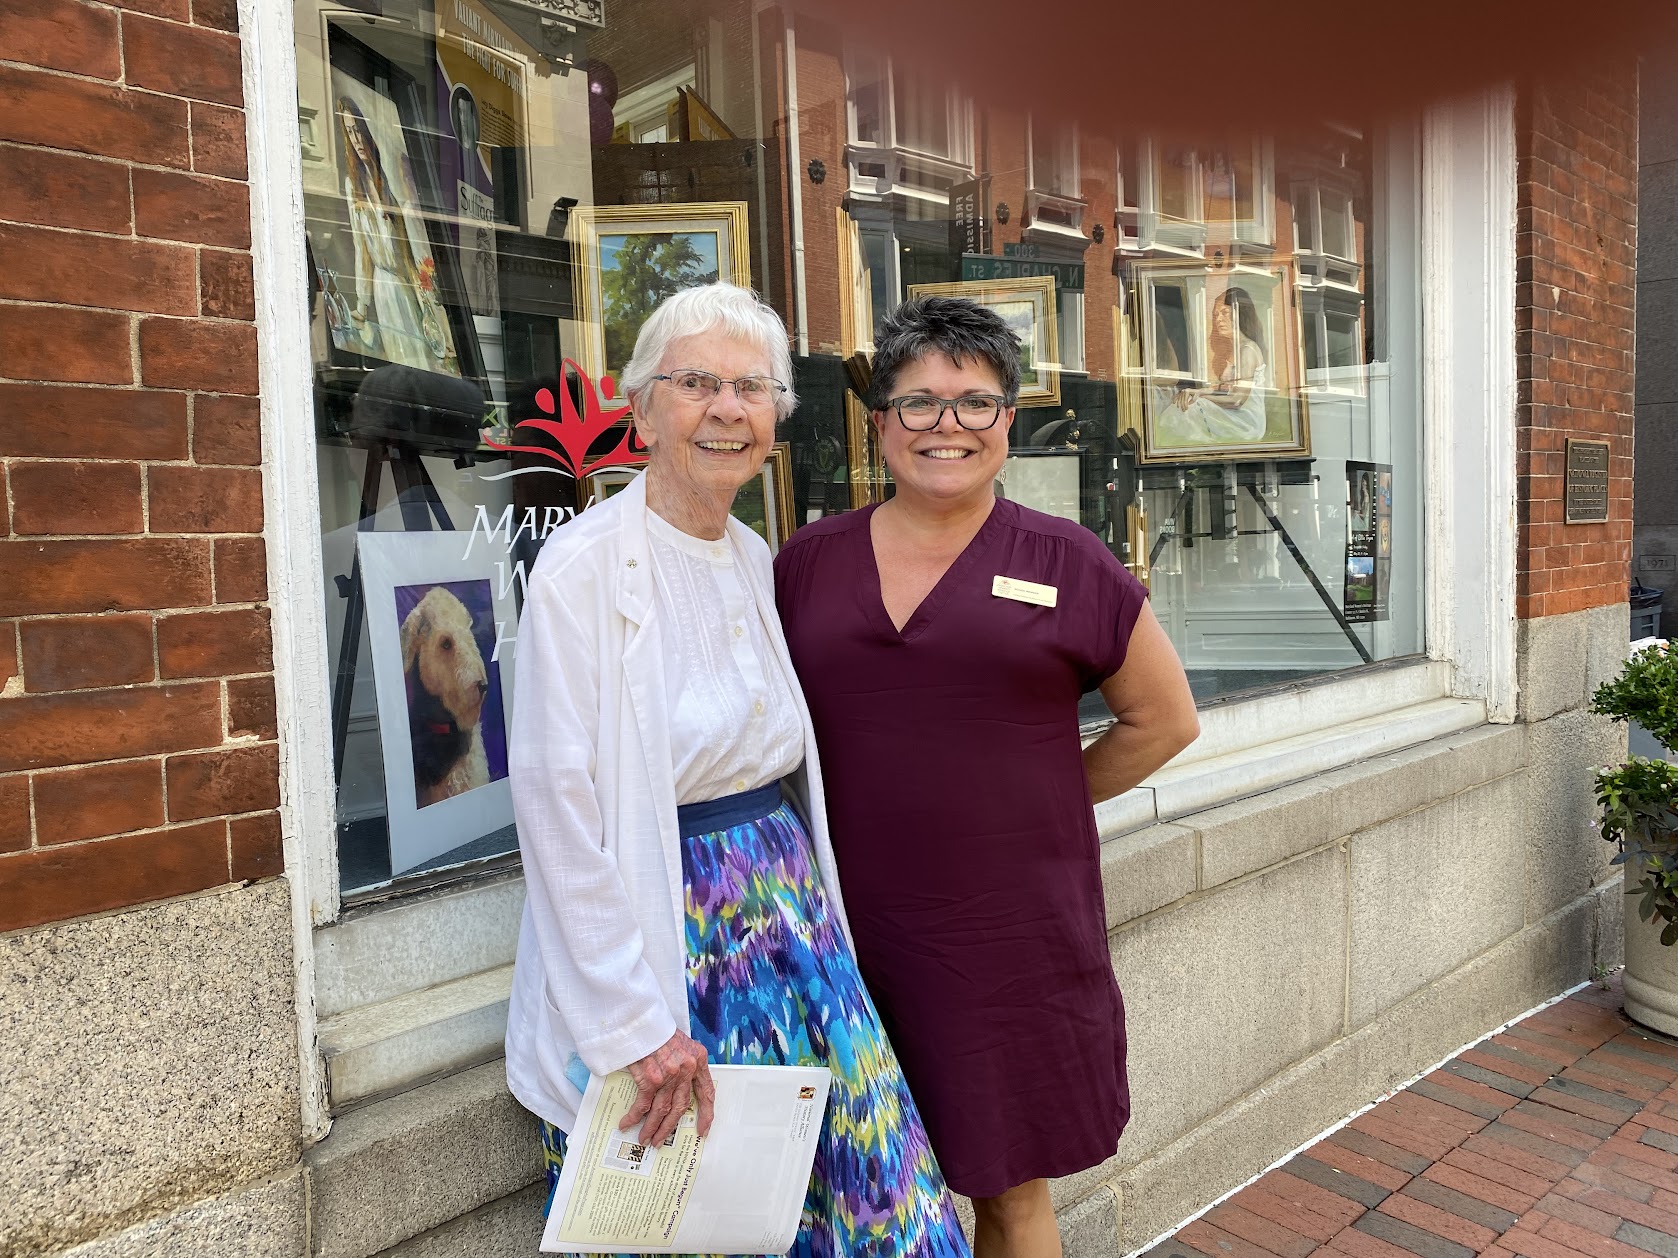 Sister Kathleen Feeley, SSND with MWHC Board Member Amy Rosenkrans, exterior of building